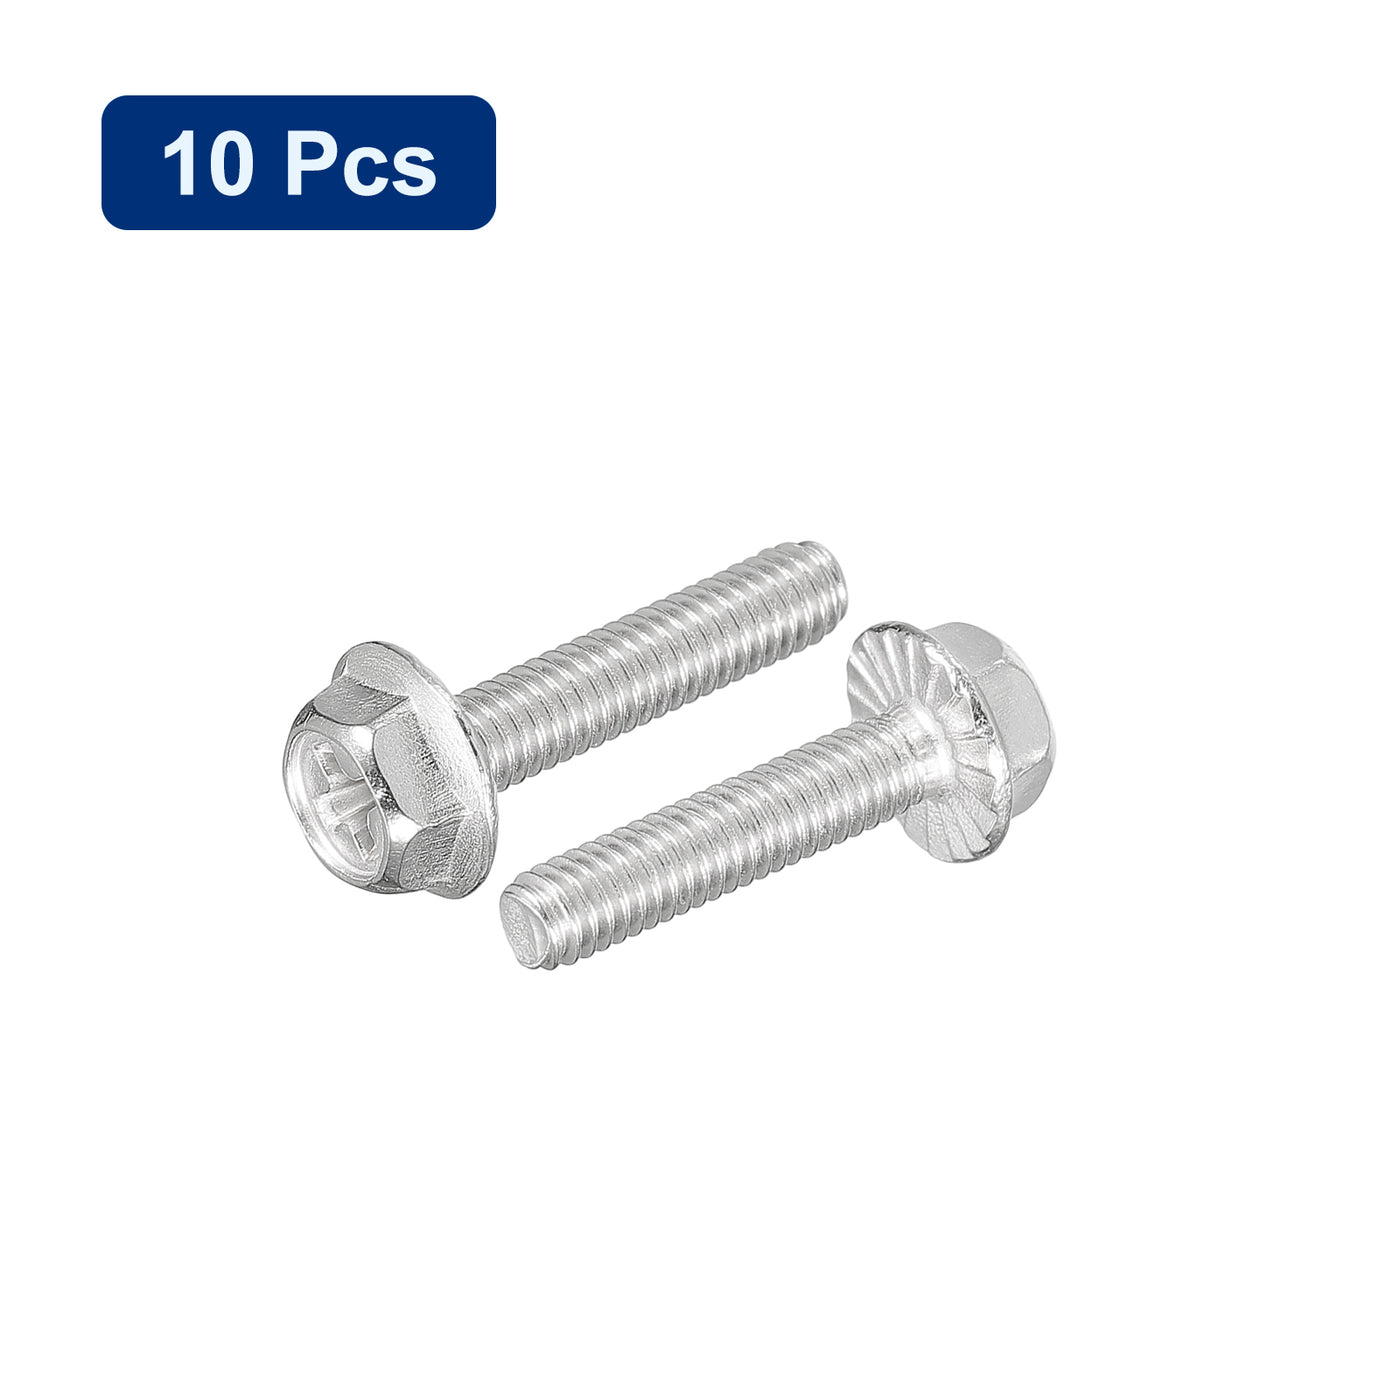 uxcell Uxcell M4x18mm Phillips Hex Head Flange Bolts, 10pcs 304 Stainless Steel Screws